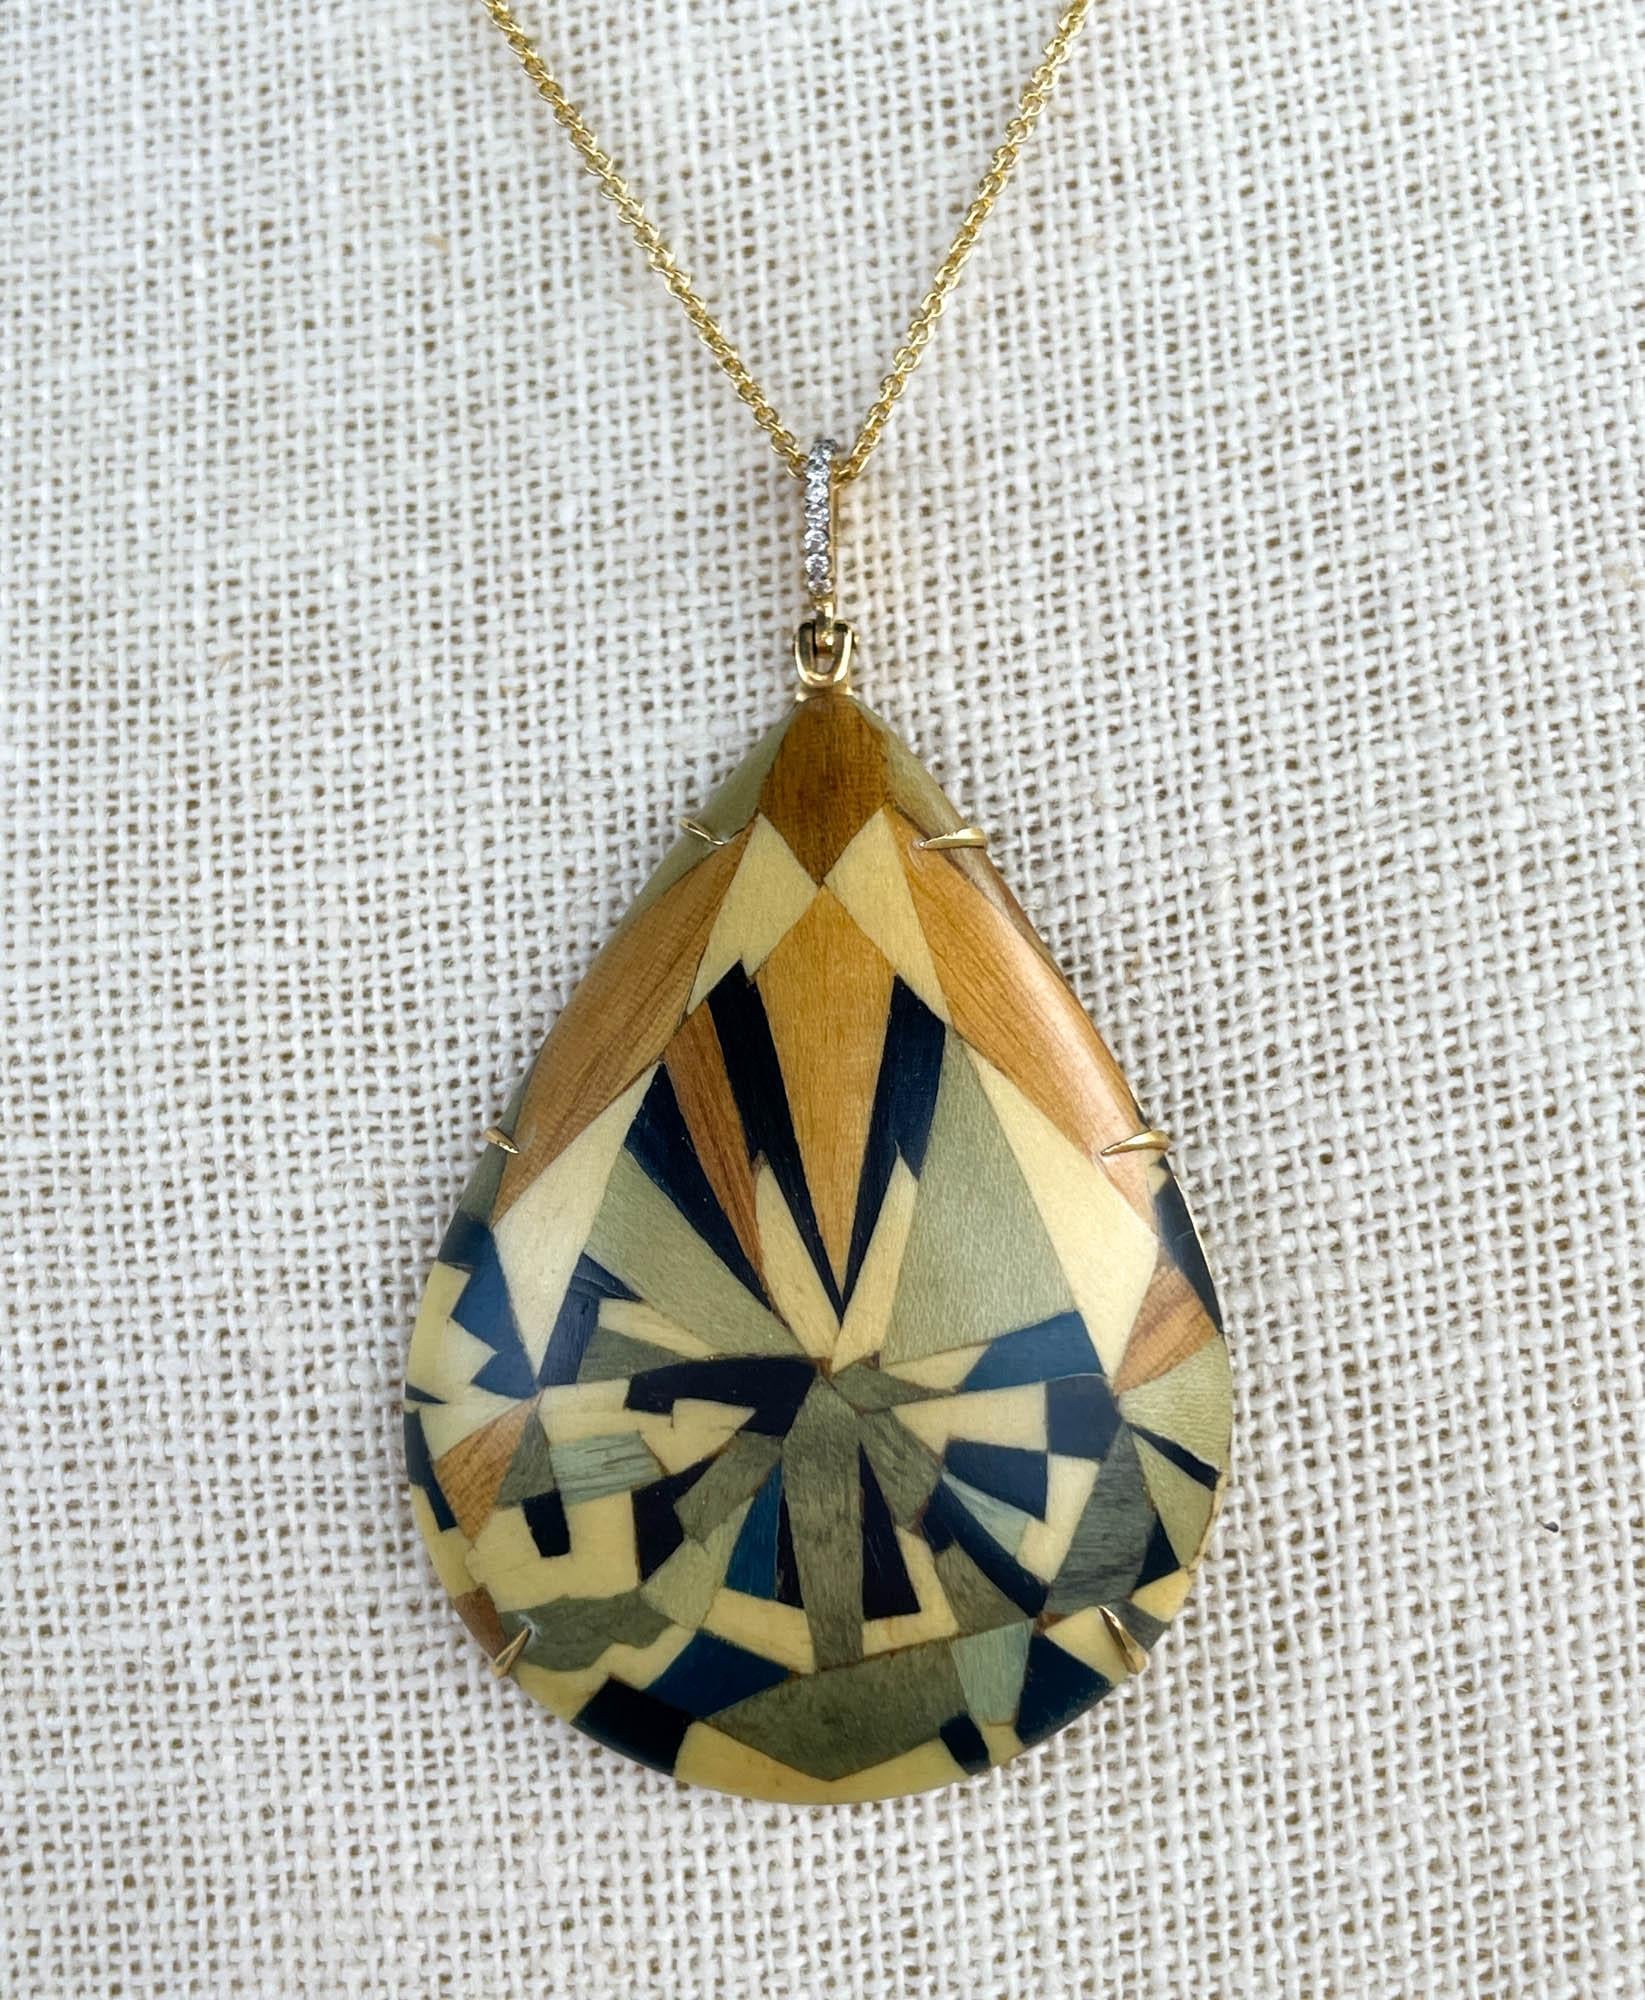 Silvia Furmanovich 18k Yellow Gold Diamond Teardrop Marquetry Wood Pendant
Set with round brilliant diamonds; estimated total weight is 0.05ctw.
The pendant is 2 3/8 inches; Teardrop’s measurements are 48x31mm.
The total weight is 9.2 grams.
Pendant